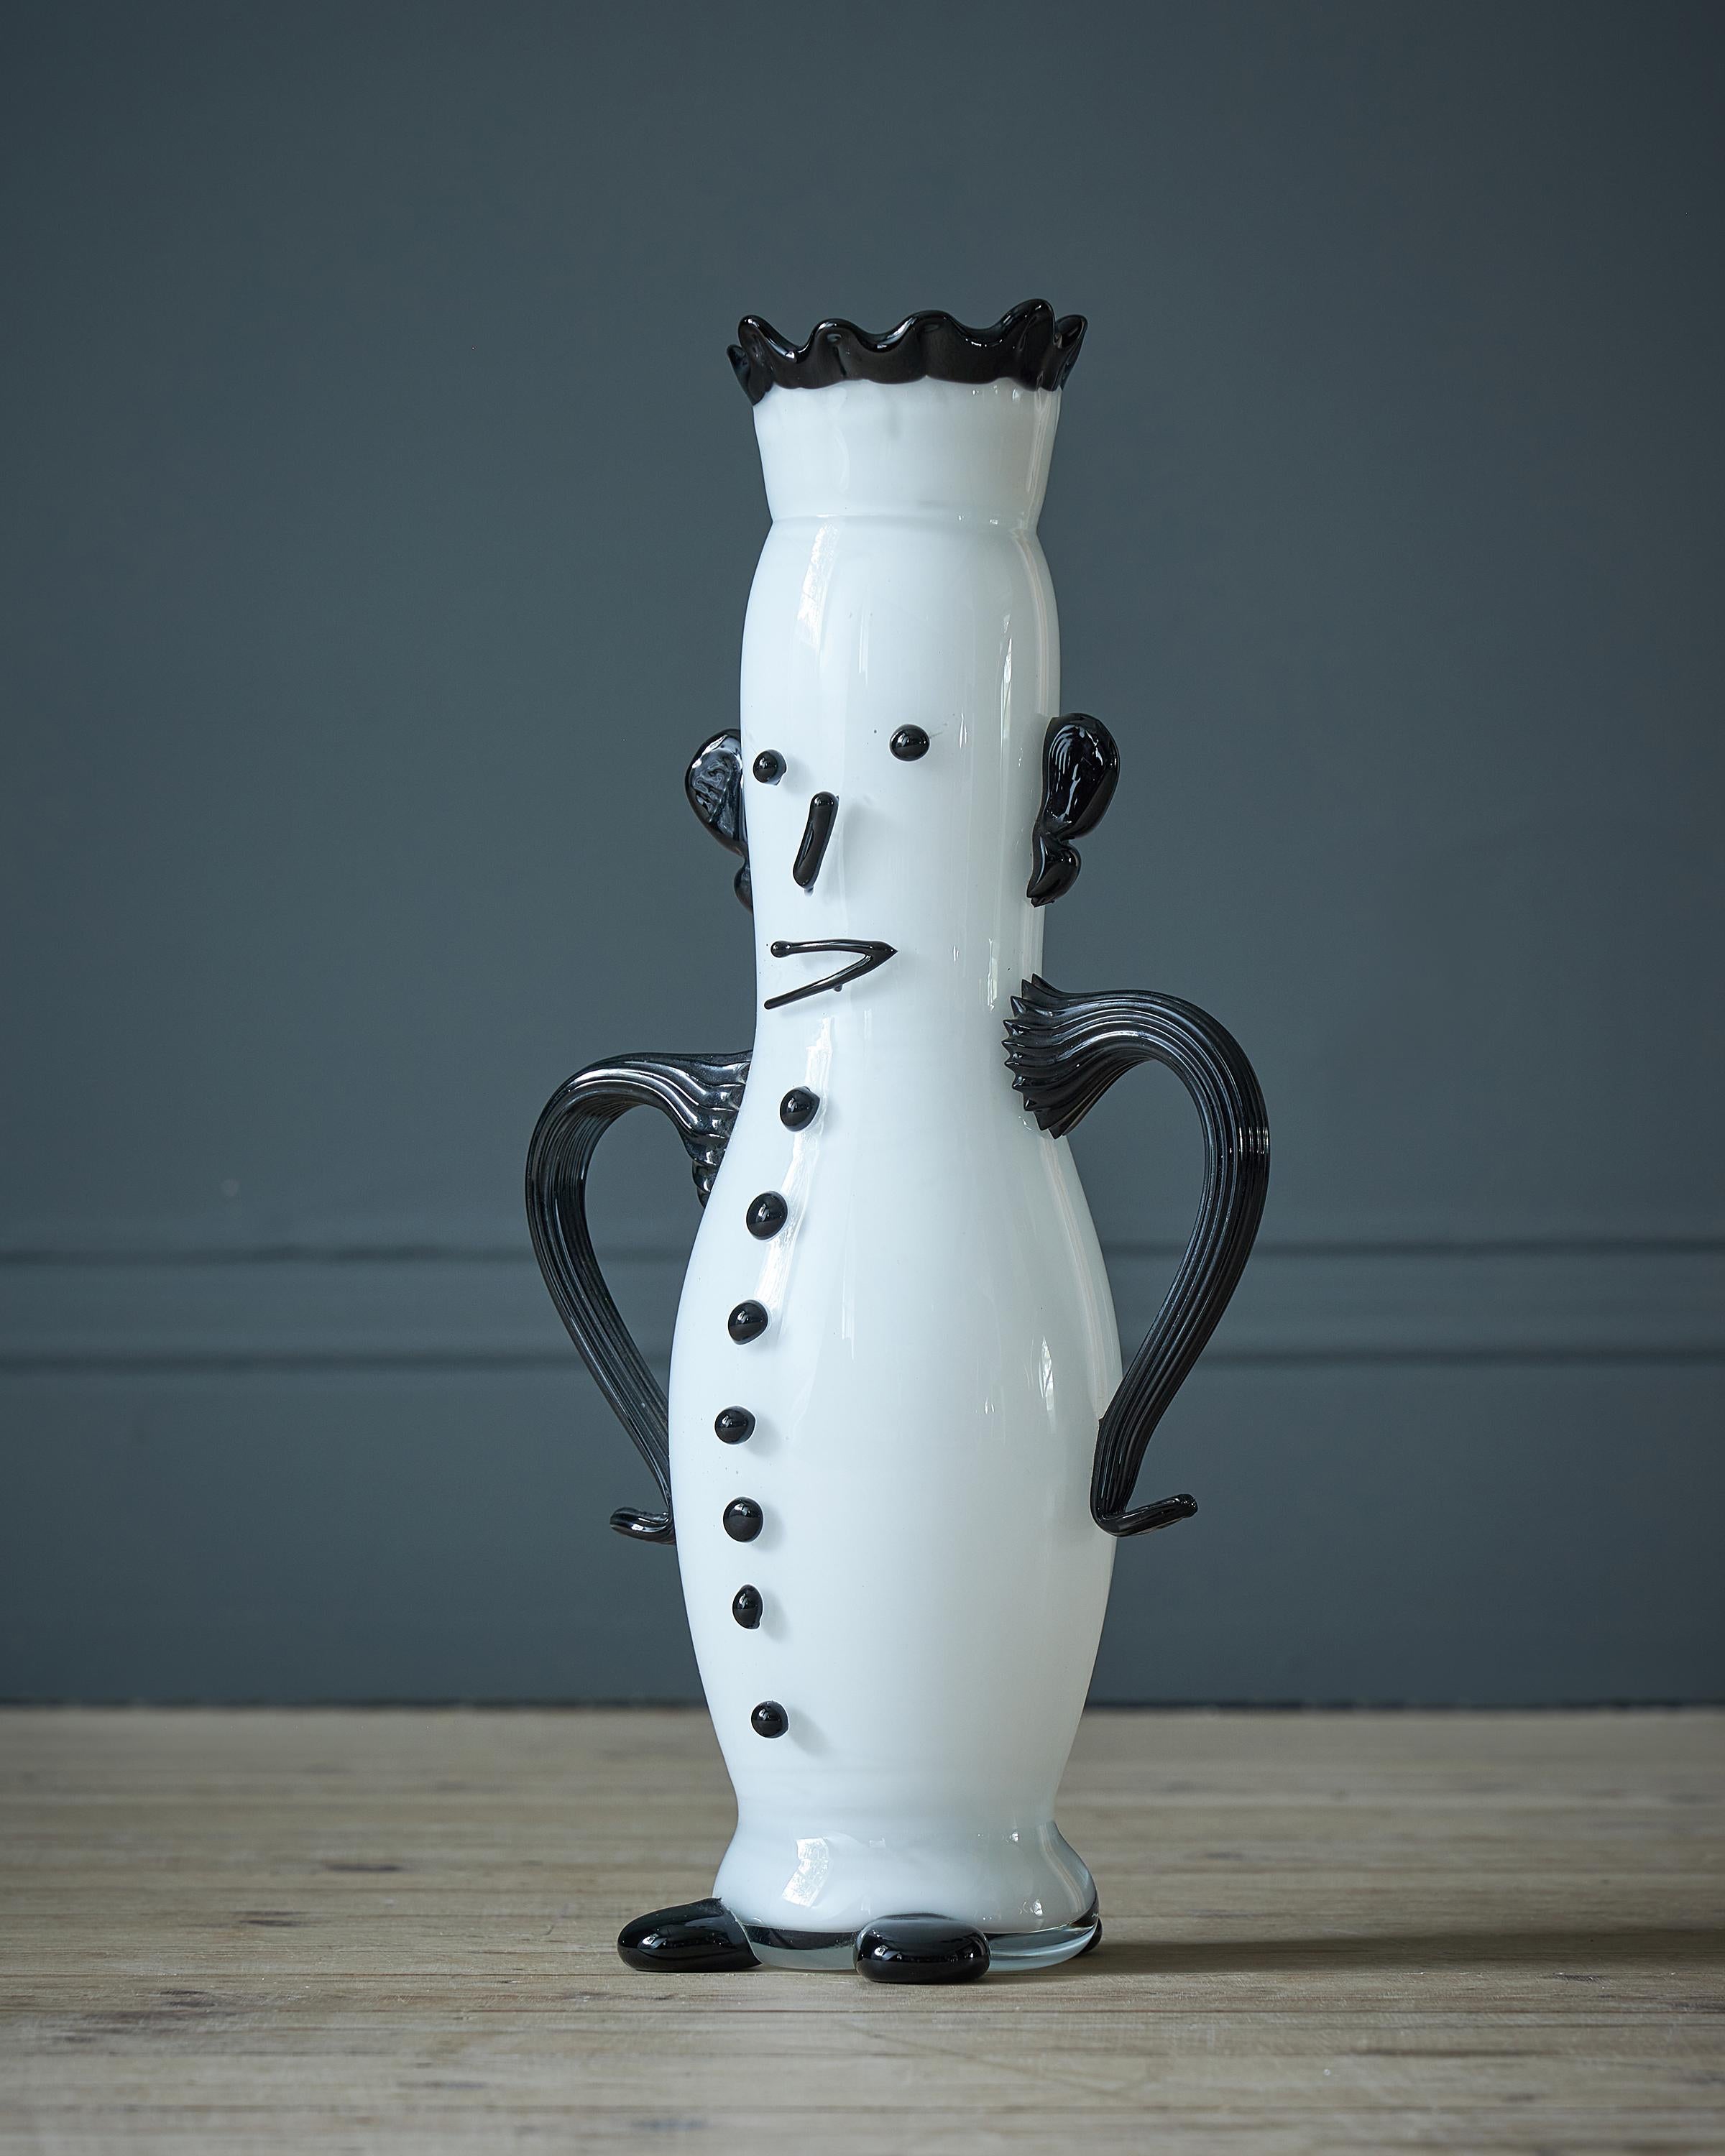 The Watercarrier, a glass figural vase designed by Pablo Picasso, made by Aldo Bon, 1955, white glass with applied black detailing, etched Aldo Bon Murano Italian one fit and Picasso on the other foot.